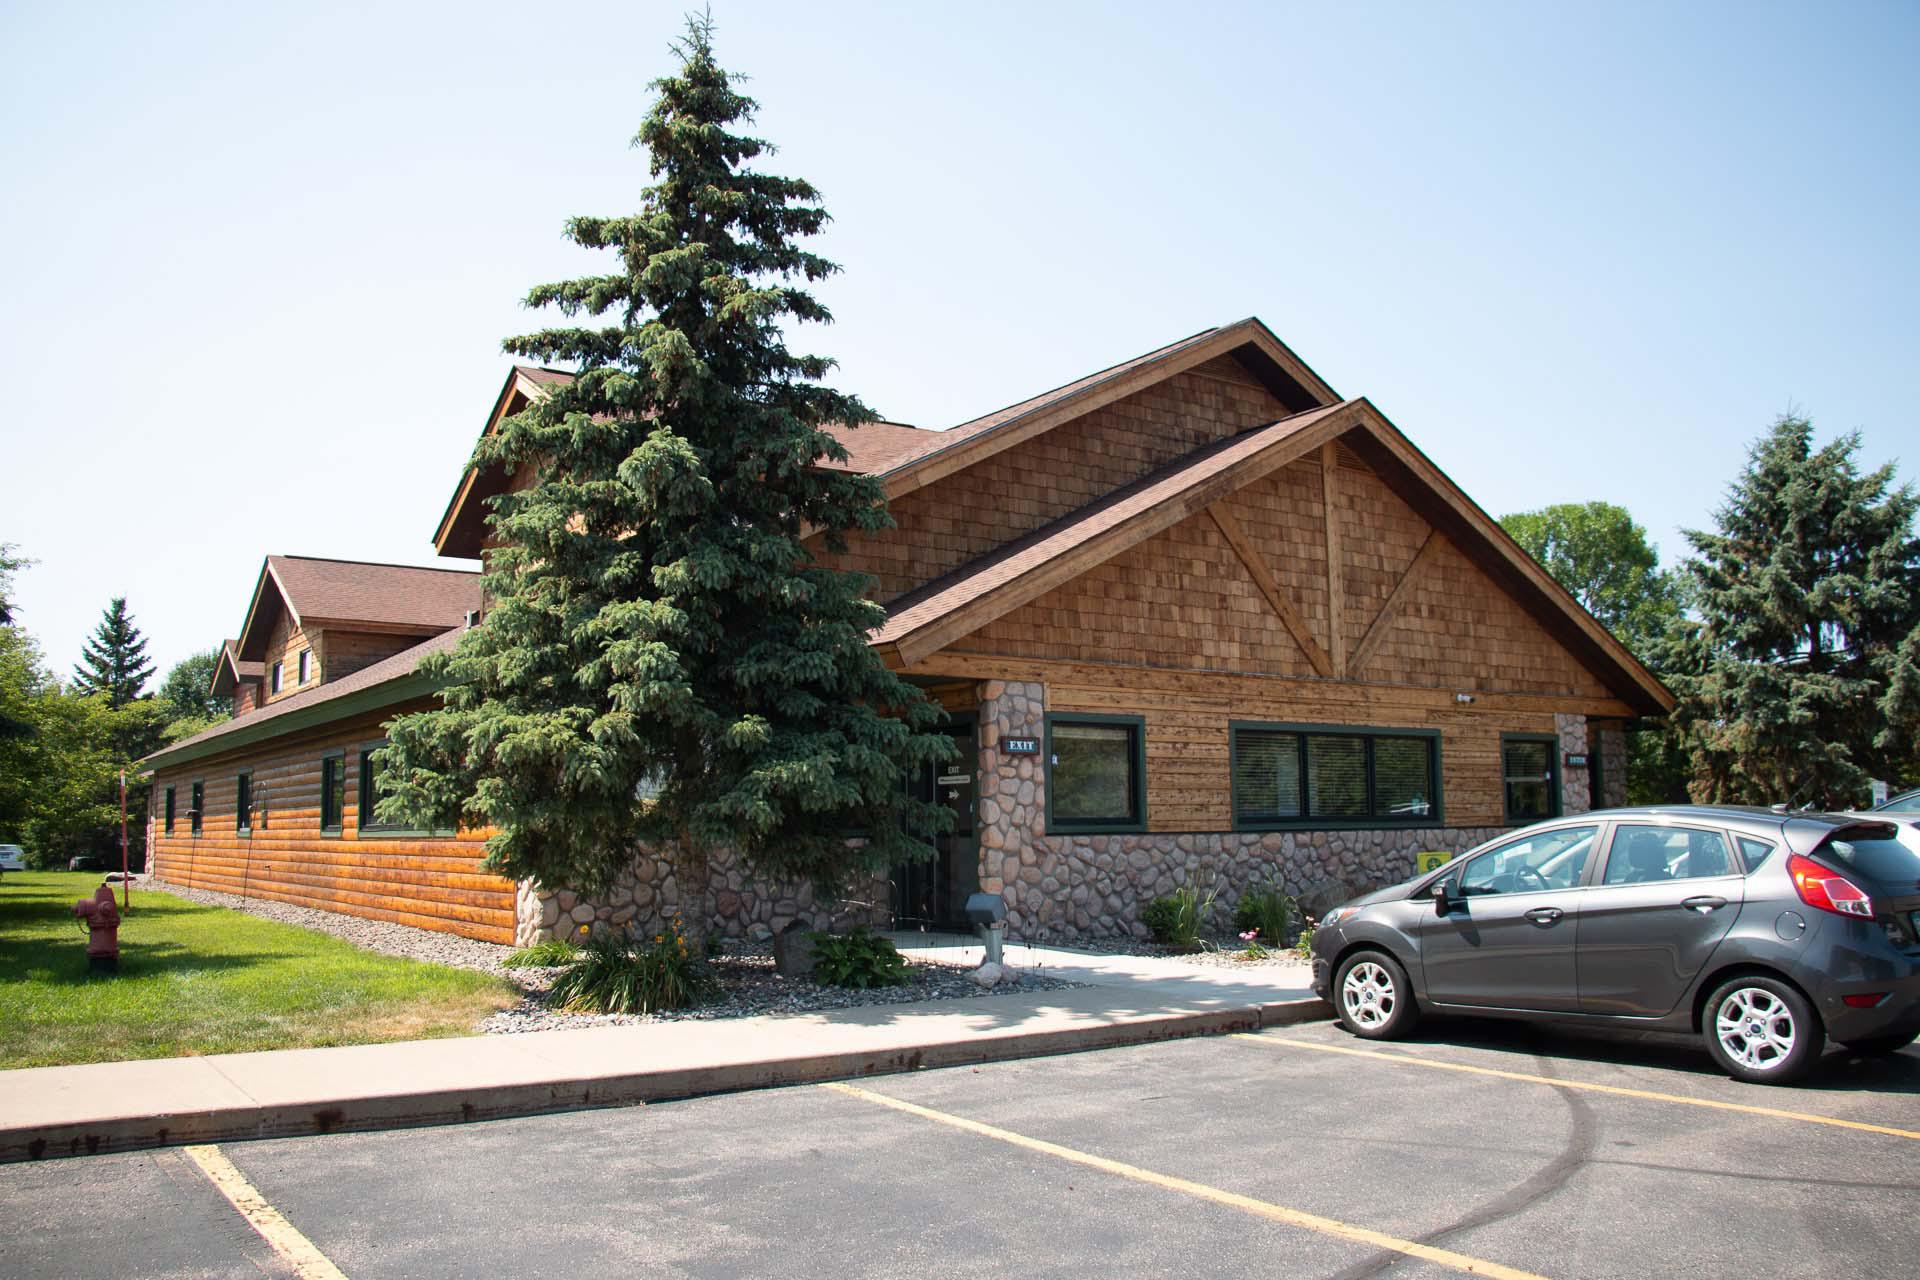 Lakeland Veterinary Hospital has been serving the Brainerd Lakes Region for more than 40 years. Our  Lakeland Veterinary Hospital Baxter (218)829-1709